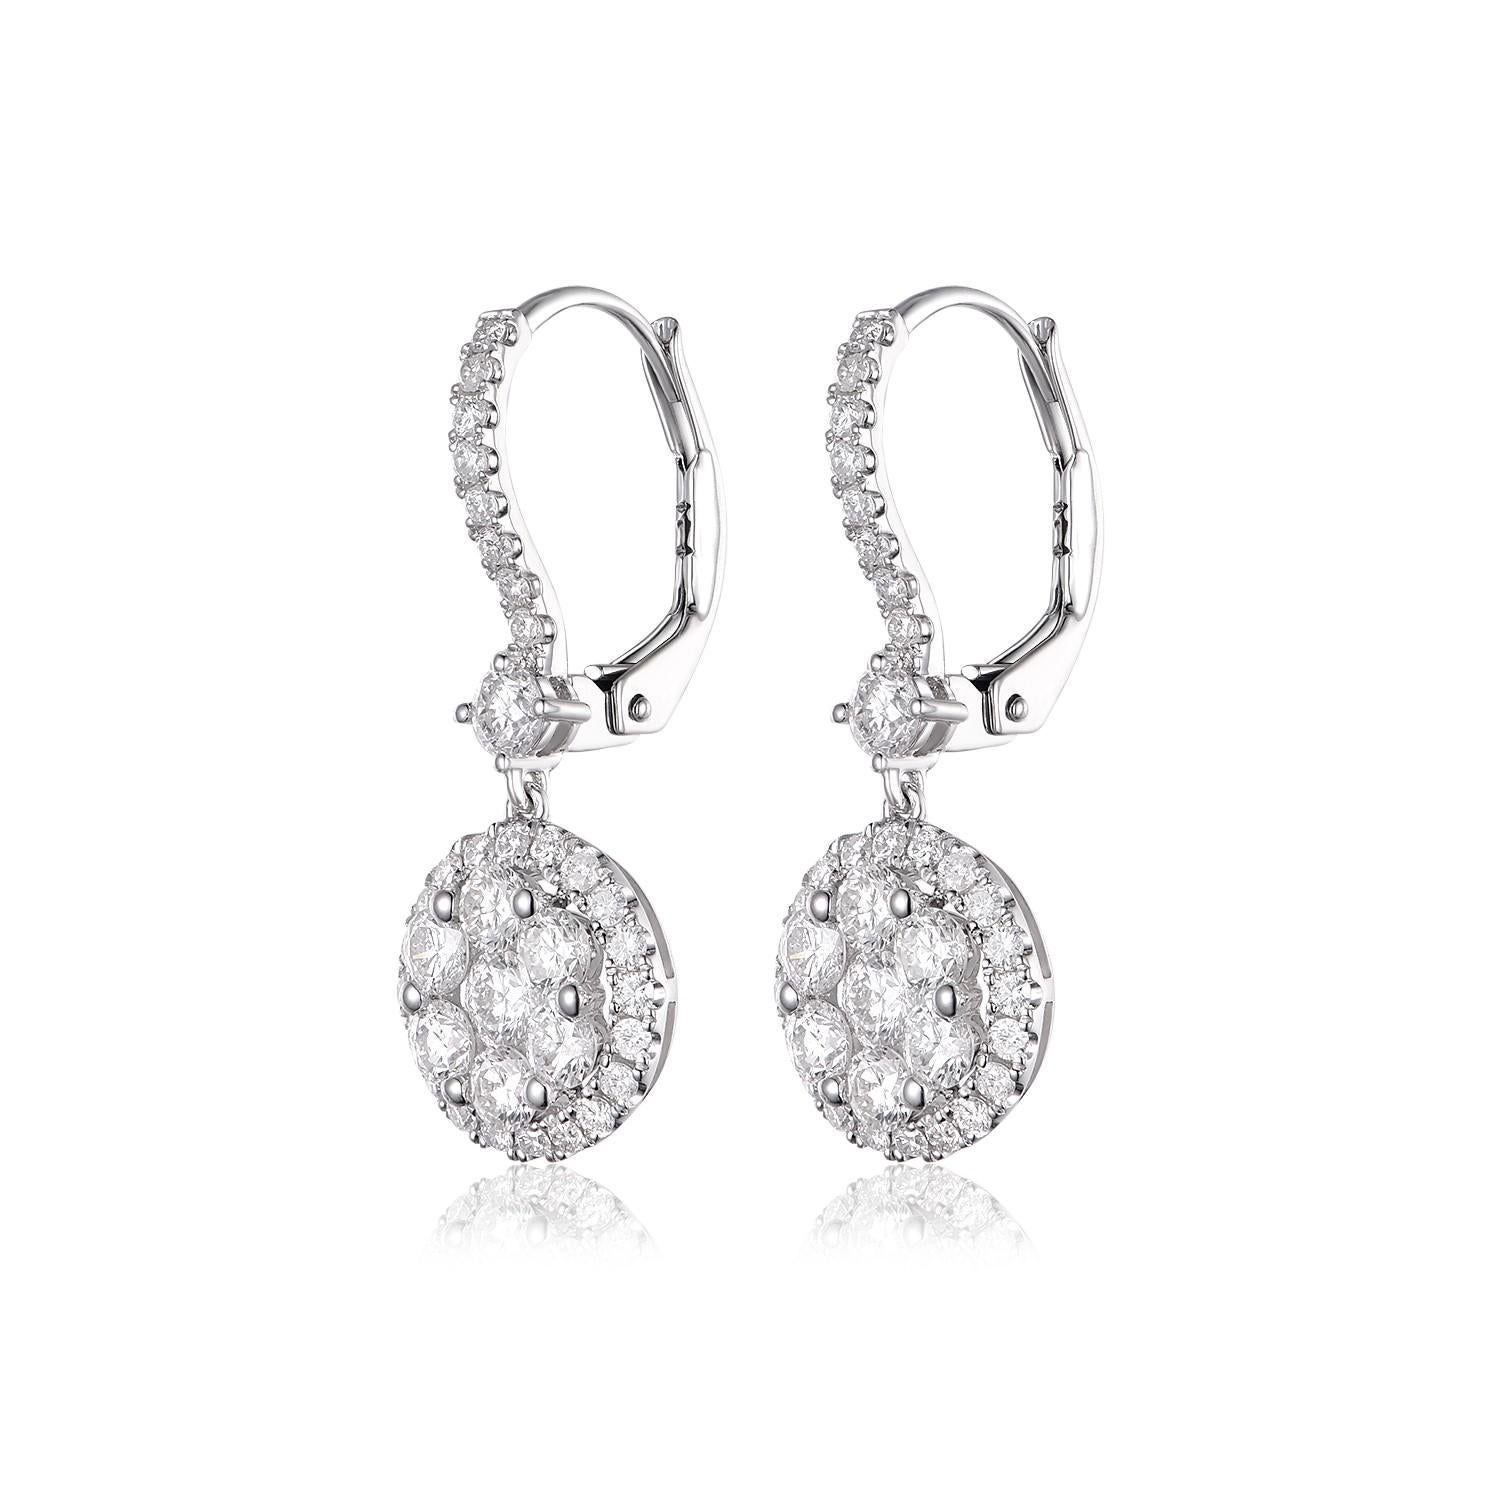 In the realm of fine jewelry, there are certain pieces that capture the essence of timeless beauty and elegance. Among such masterpieces are the 18K White Gold Diamond Drop Earrings, adorned with an impressive 1.58ct of diamonds. These earrings are